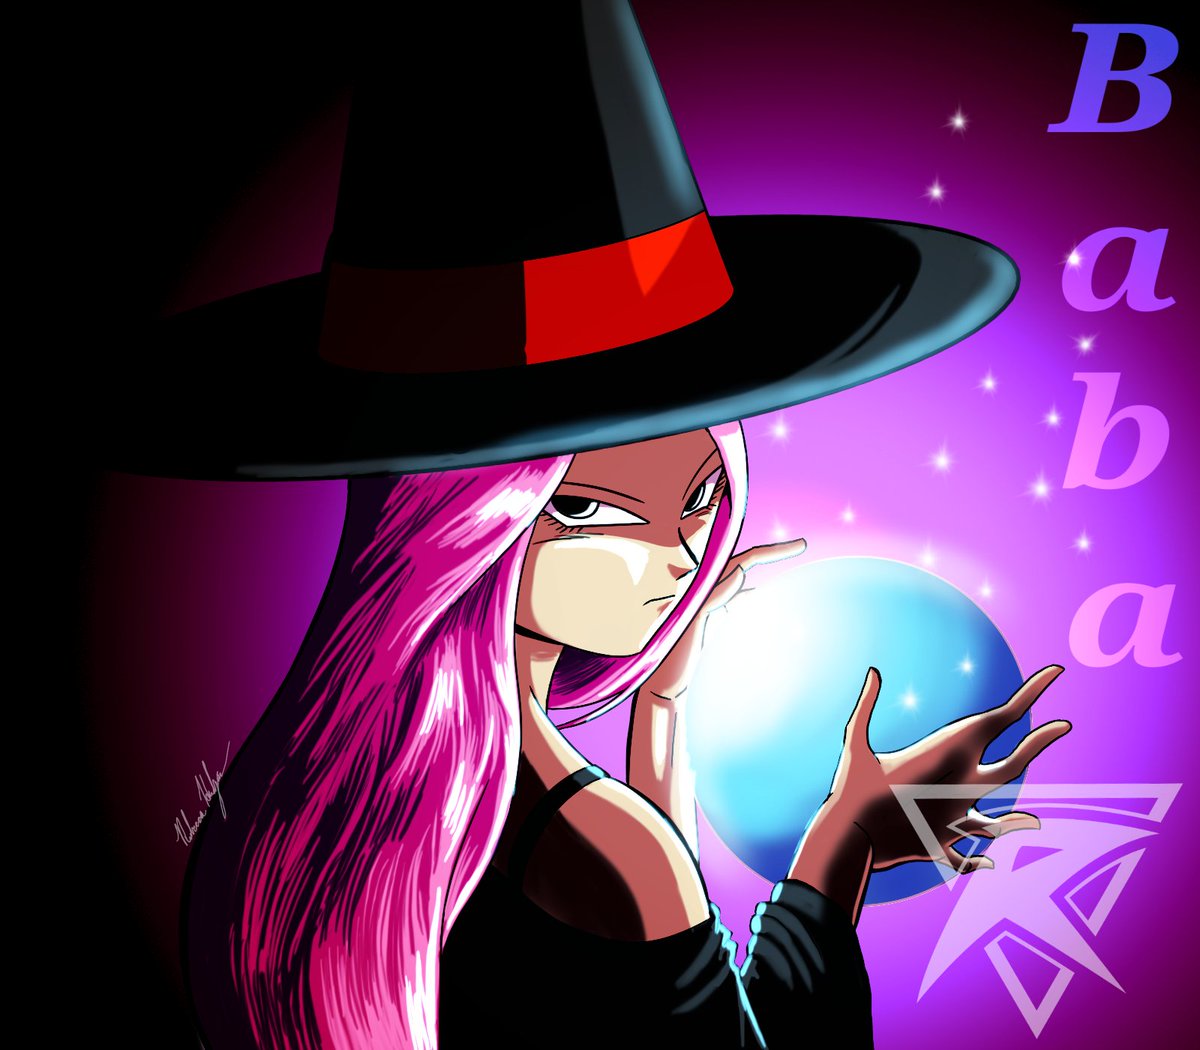 A young witch named Baba... #DragonBall #DragonBallZ #FortunetellerBaba #Baba #witch #crystalball